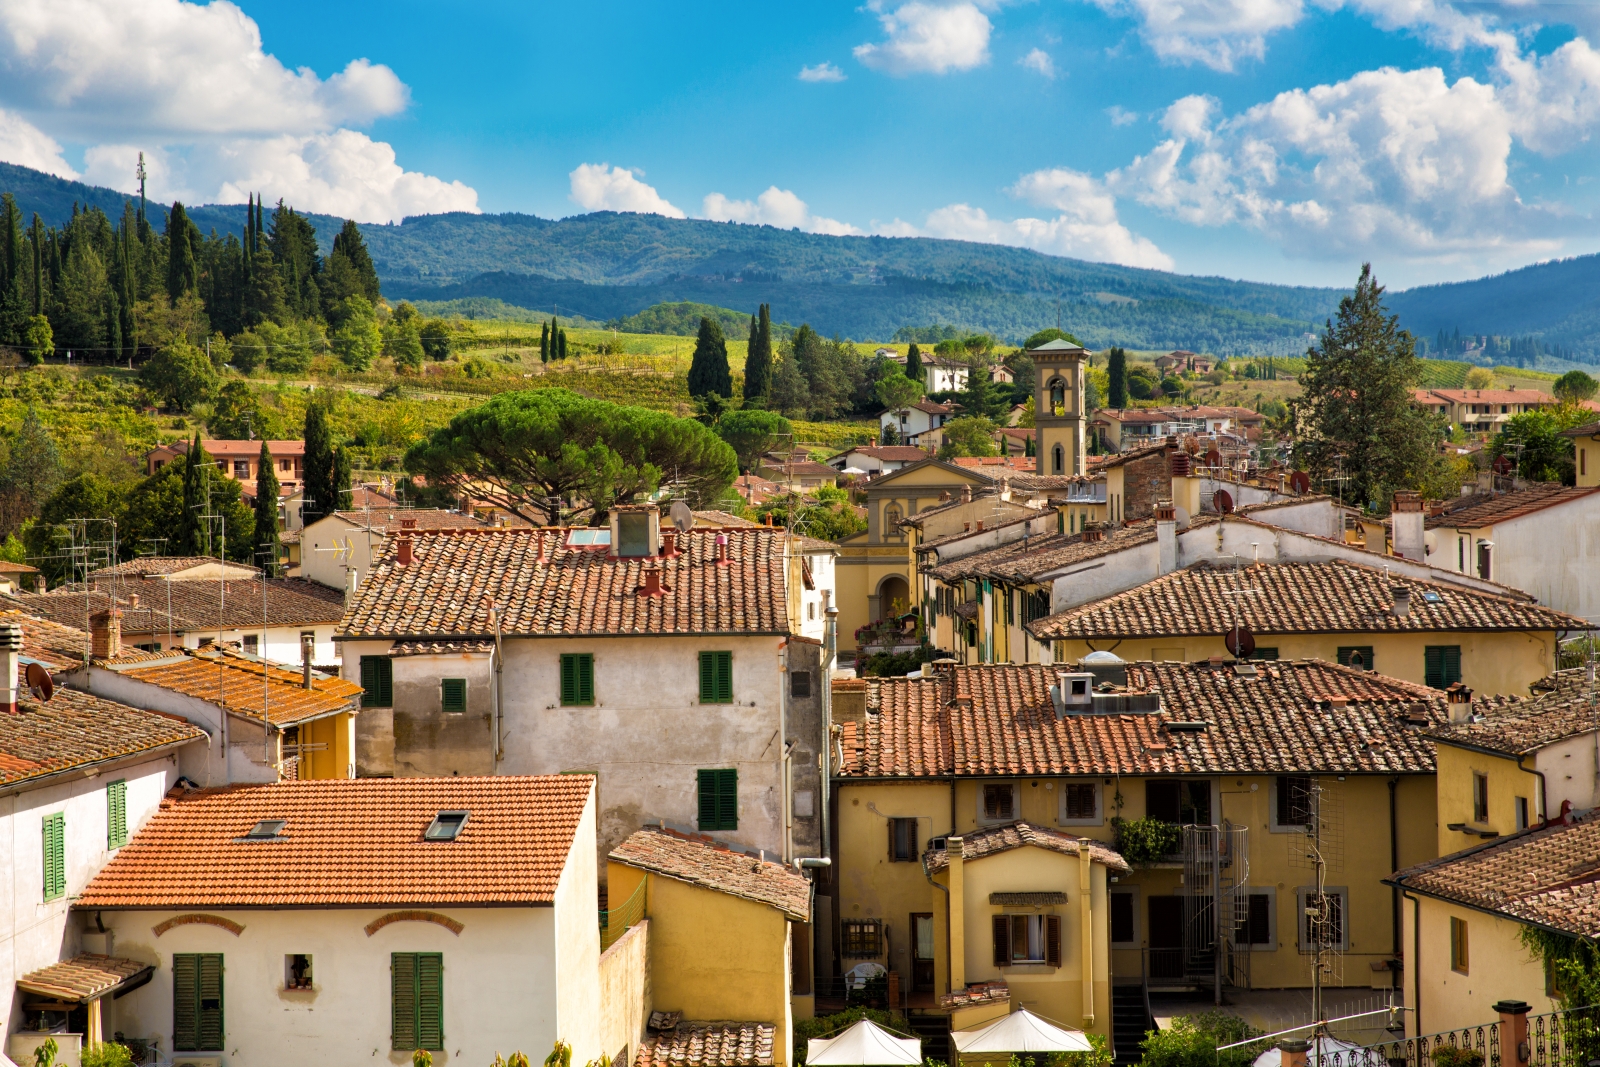 Rooftops and views of countryside in Greve in Chianti